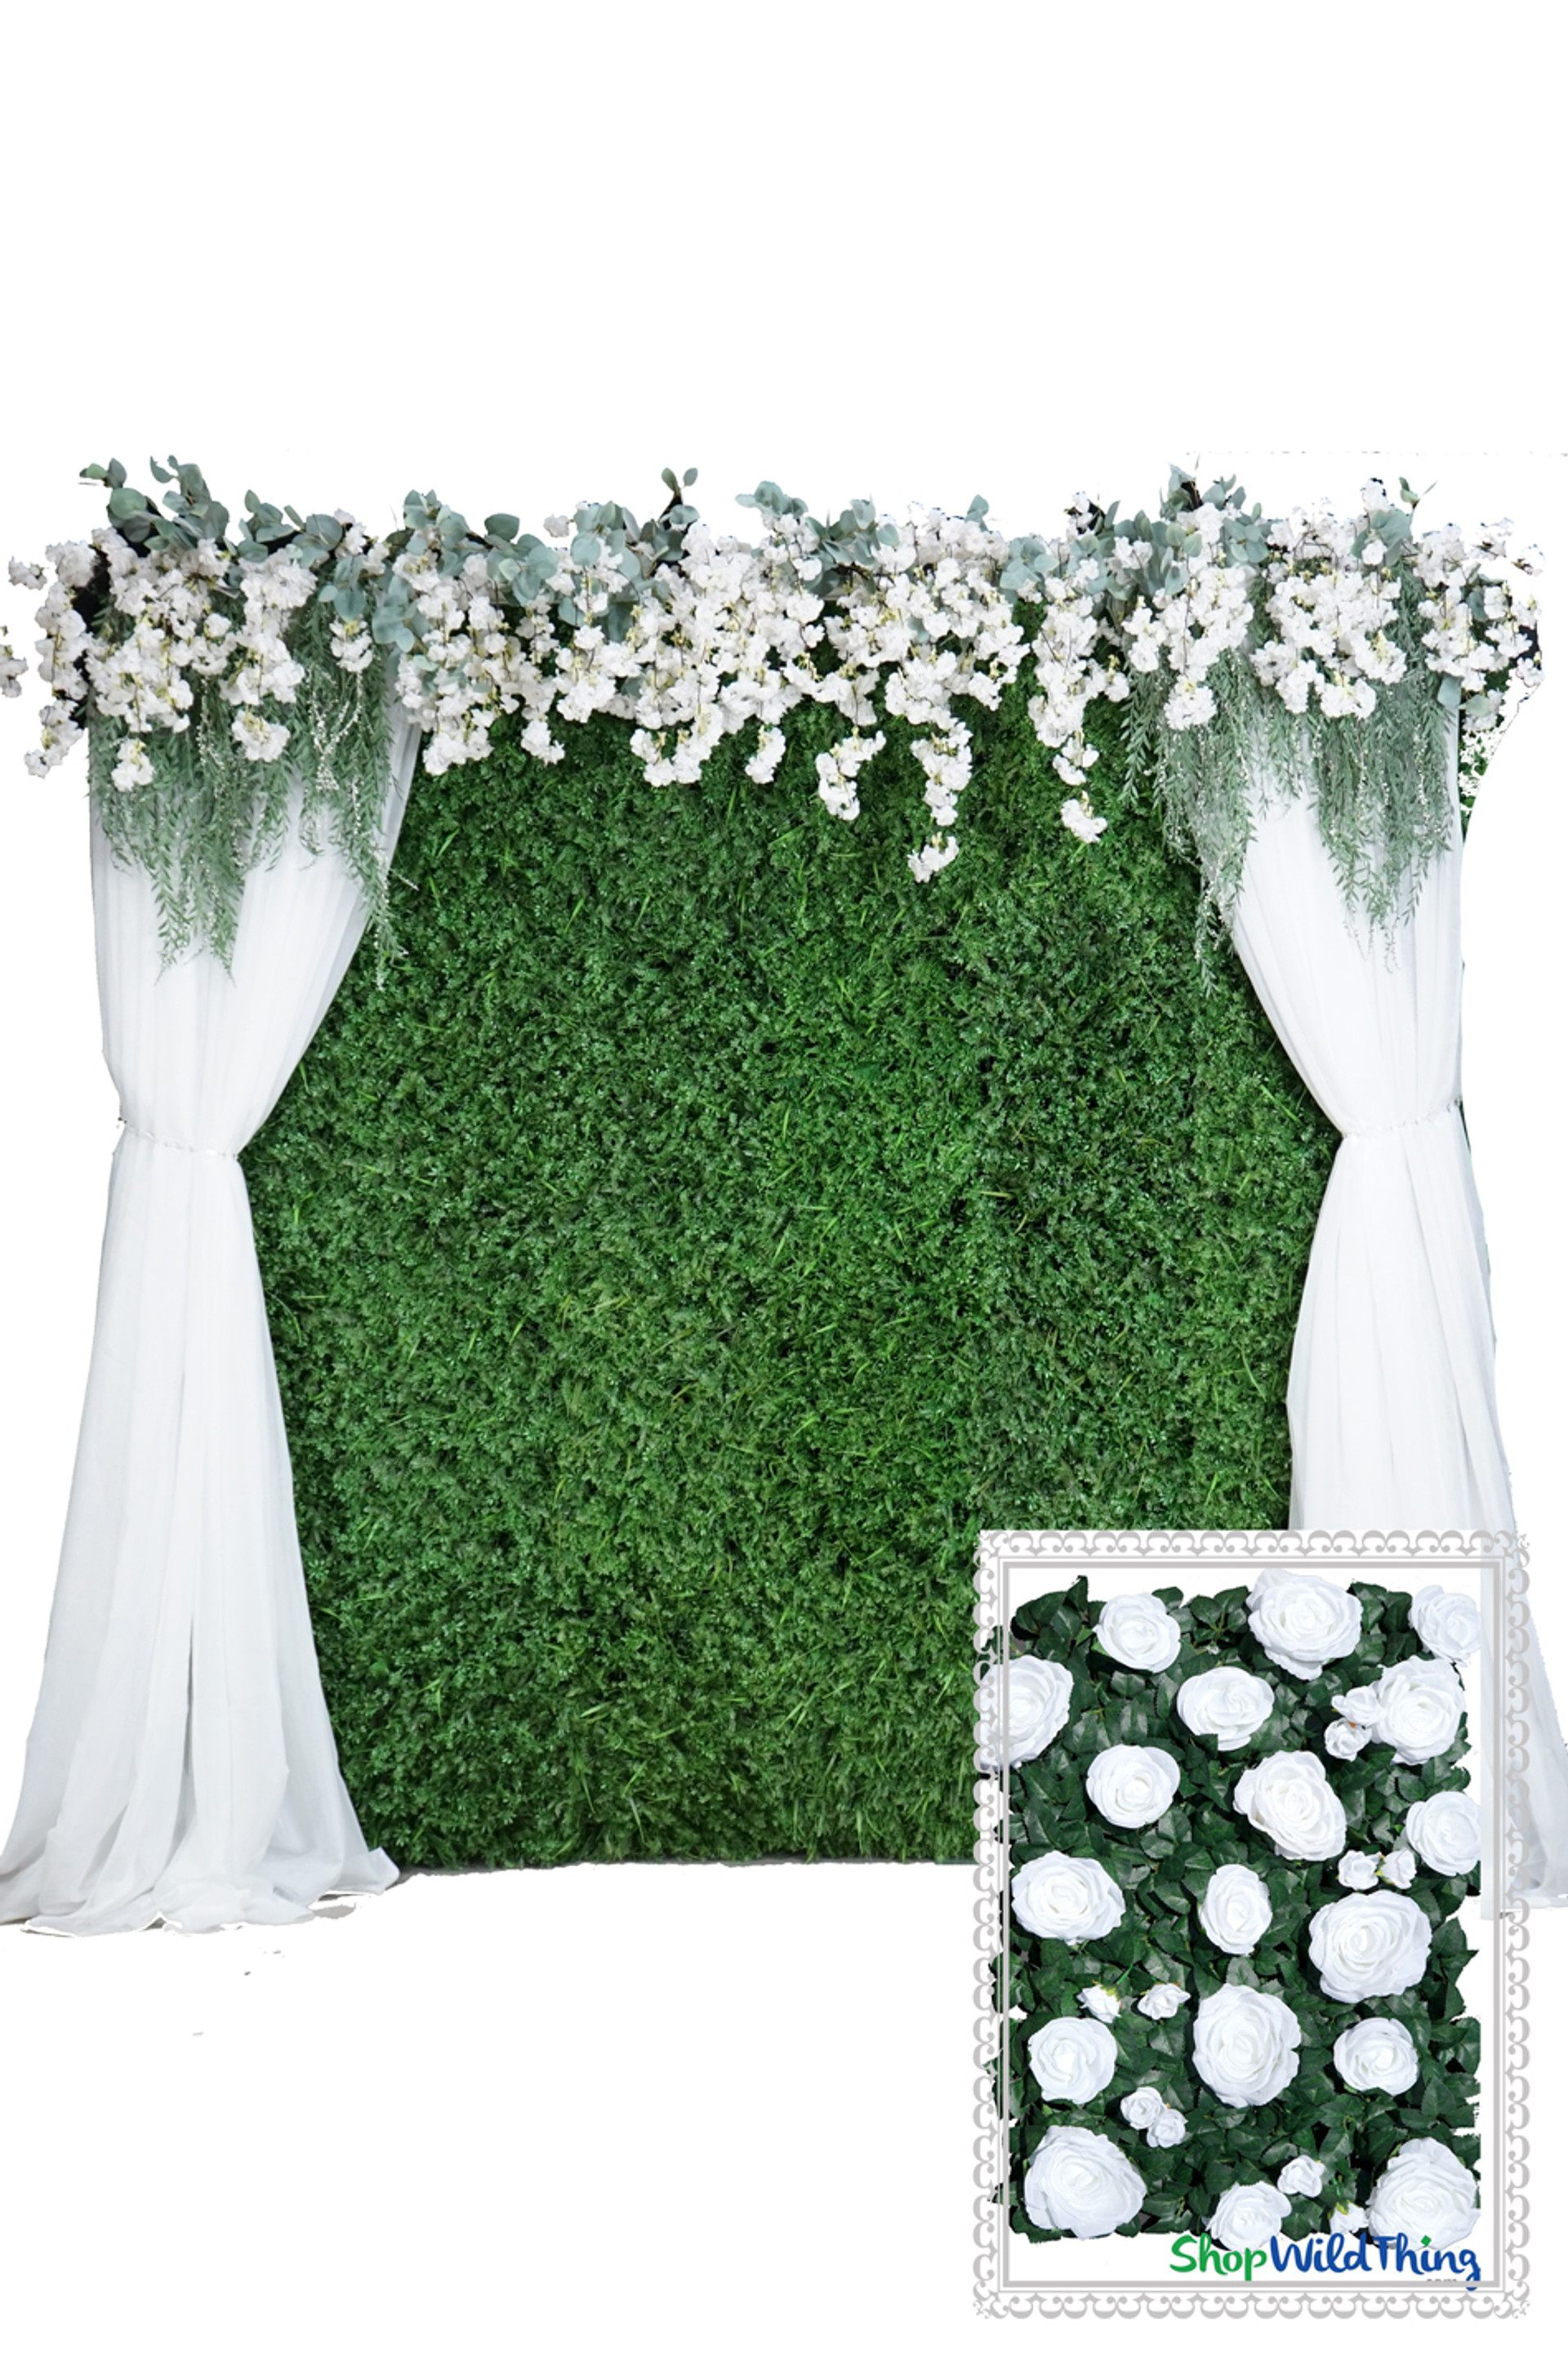 Faux Green Foliage with Flowers Greenery Wall|ShopWildThings.com